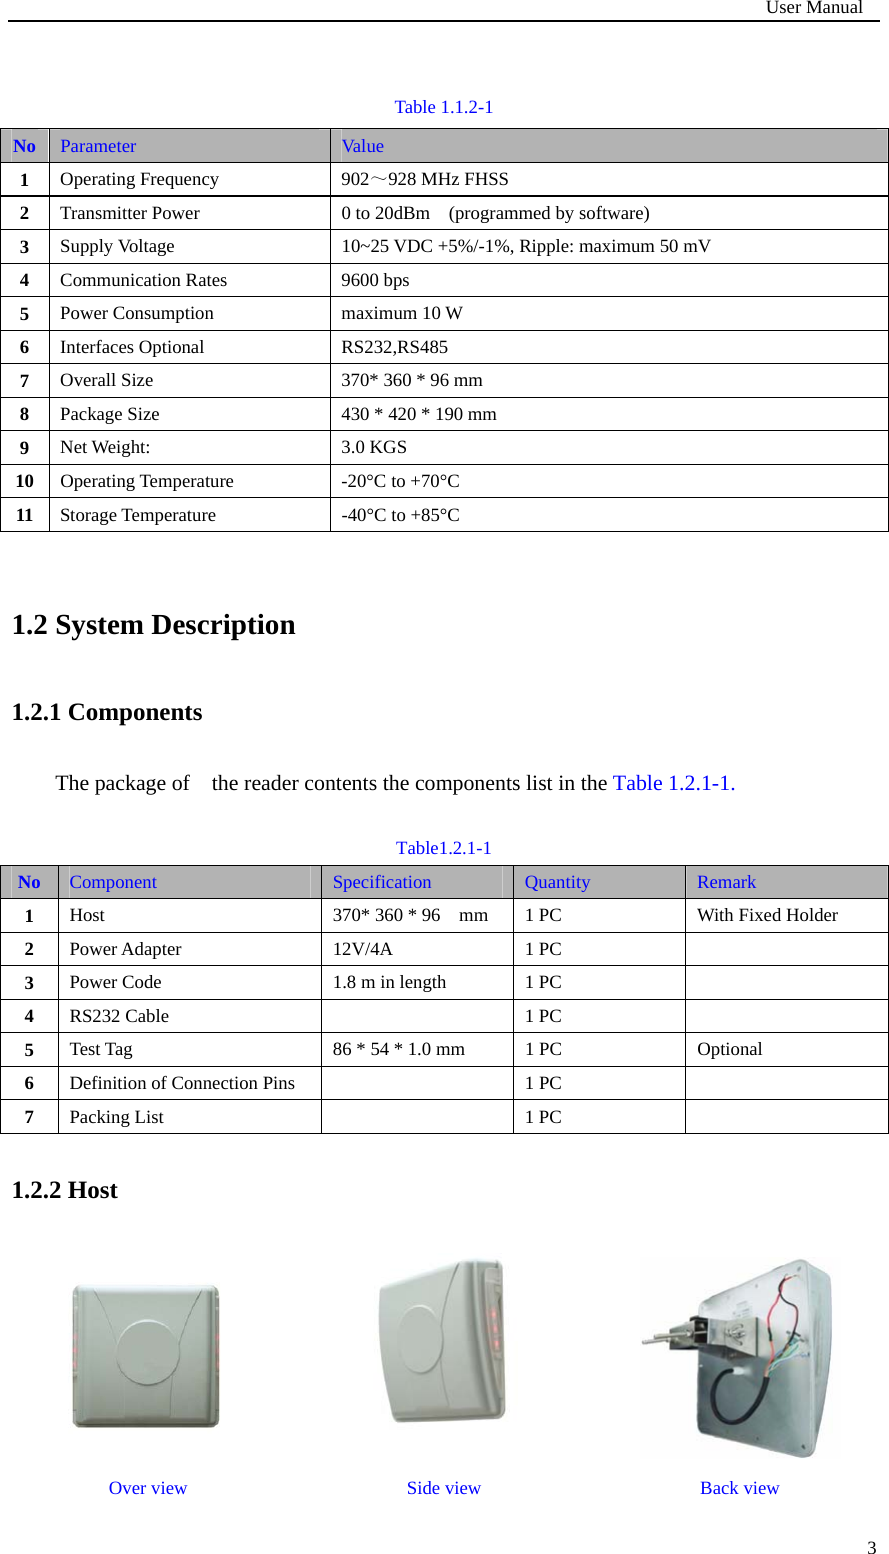                                                                             User Manual   3 Table 1.1.2-1  1.2 System Description 1.2.1 Components The package of    the reader contents the components list in the Table 1.2.1-1.  Table1.2.1-1 No  Component  Specification  Quantity  Remark 1  Host 370* 360 * 96    mm  1 PC With Fixed Holder 2  Power Adapter   12V/4A   1 PC  3  Power Code   1.8 m in length  1 PC  4  RS232 Cable    1 PC   5  Test Tag  86 * 54 * 1.0 mm  1 PC  Optional 6  Definition of Connection Pins    1 PC   7  Packing List    1 PC   1.2.2 Host    Over view  Side view  Back view No  Parameter  Value  1  Operating Frequency  902～928 MHz FHSS   2  Transmitter Power  0 to 20dBm    (programmed by software)   3  Supply Voltage  10~25 VDC +5%/-1%, Ripple: maximum 50 mV 4  Communication Rates  9600 bps 5  Power Consumption  maximum 10 W 6  Interfaces Optional  RS232,RS485 7  Overall Size  370* 360 * 96 mm 8  Package Size  430 * 420 * 190 mm   9  Net Weight:  3.0 KGS 10  Operating Temperature  -20°C to +70°C 11  Storage Temperature  -40°C to +85°C 